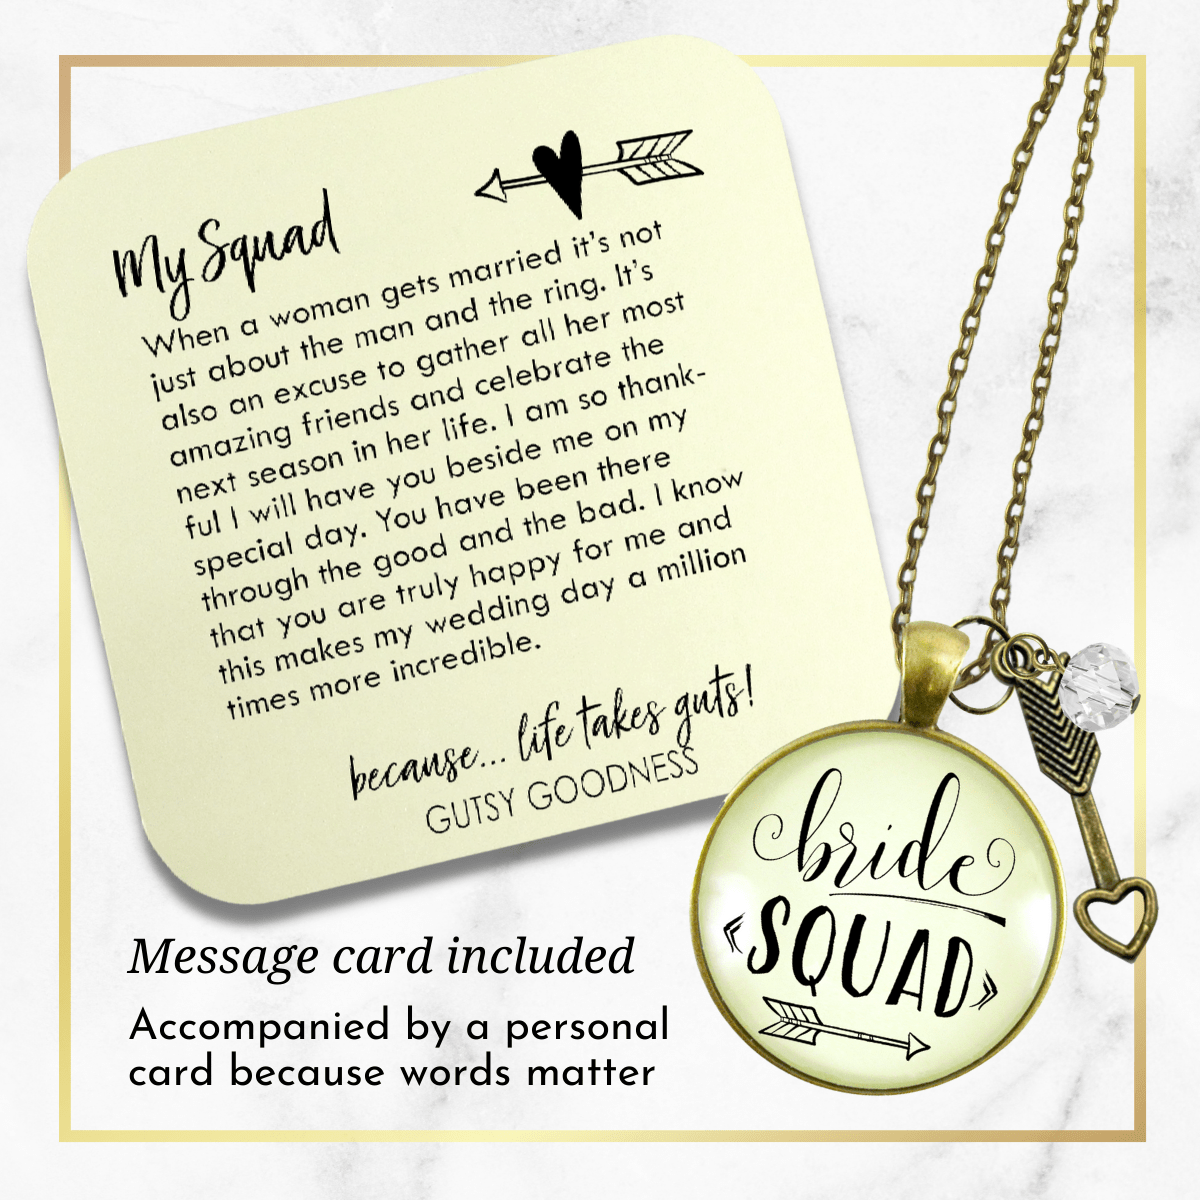 Gutsy Goodness Bride Squad Necklace Bridesmaid Vintage Wedding Design Jewelry Gift - Gutsy Goodness;Bride Squad Necklace Bridesmaid Vintage Wedding Design Jewelry Gift - Gutsy Goodness Handmade Jewelry Gifts